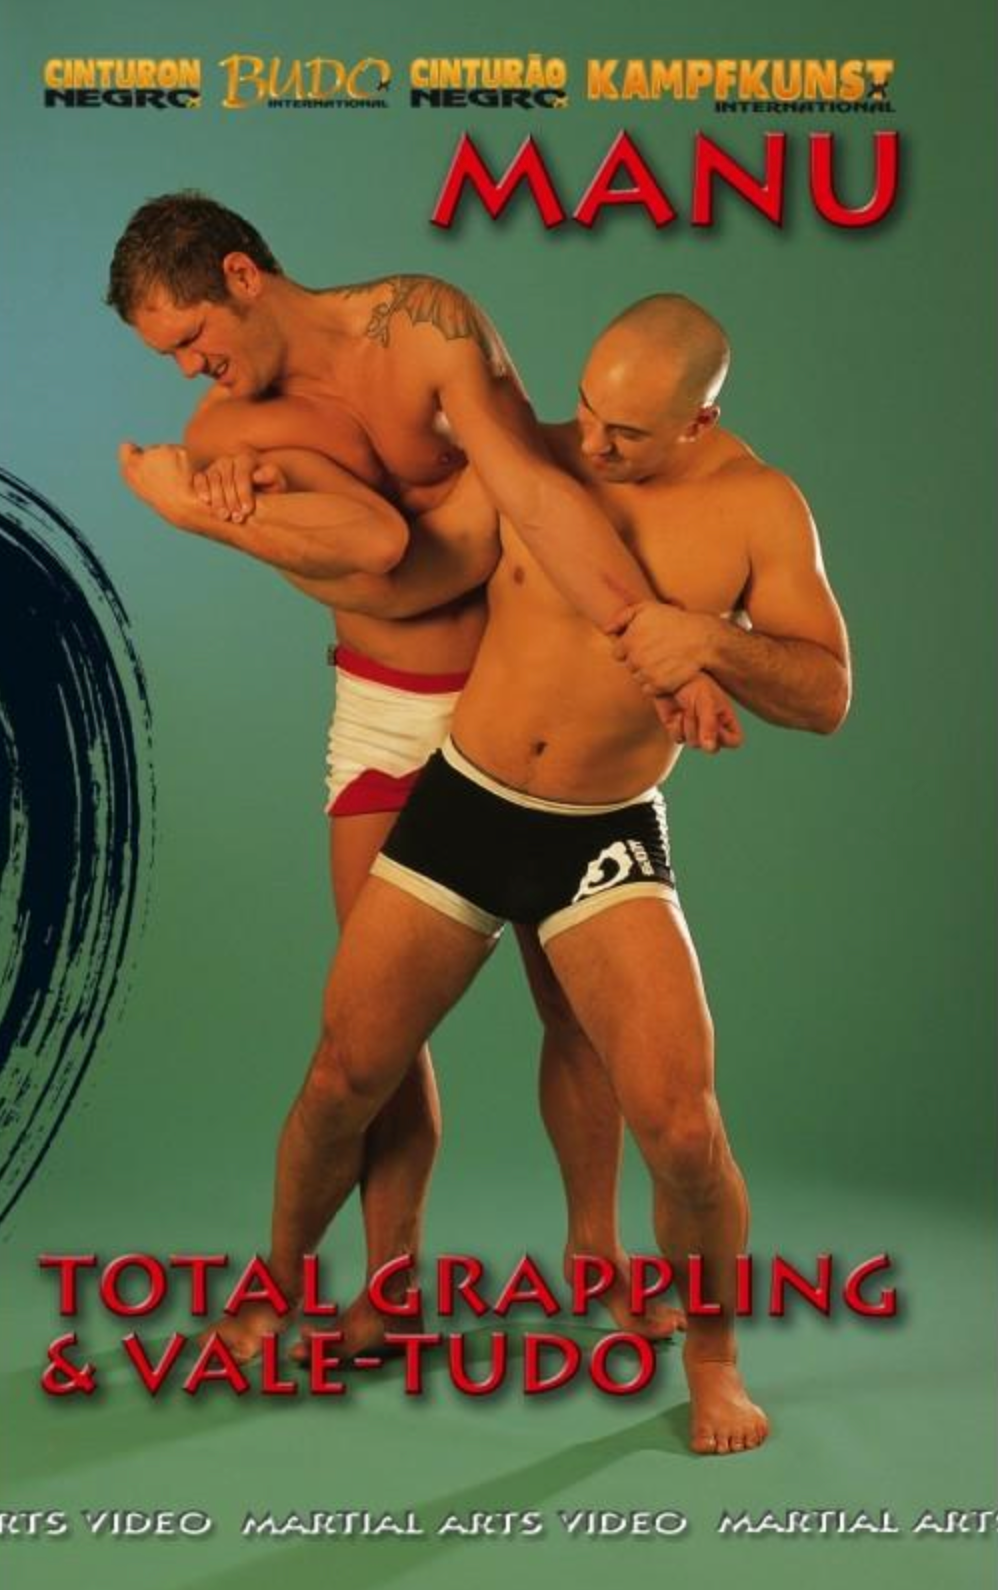 Total Grappling & Vale Tudo Escapes & Submissions DVD with Manu - Budovideos Inc